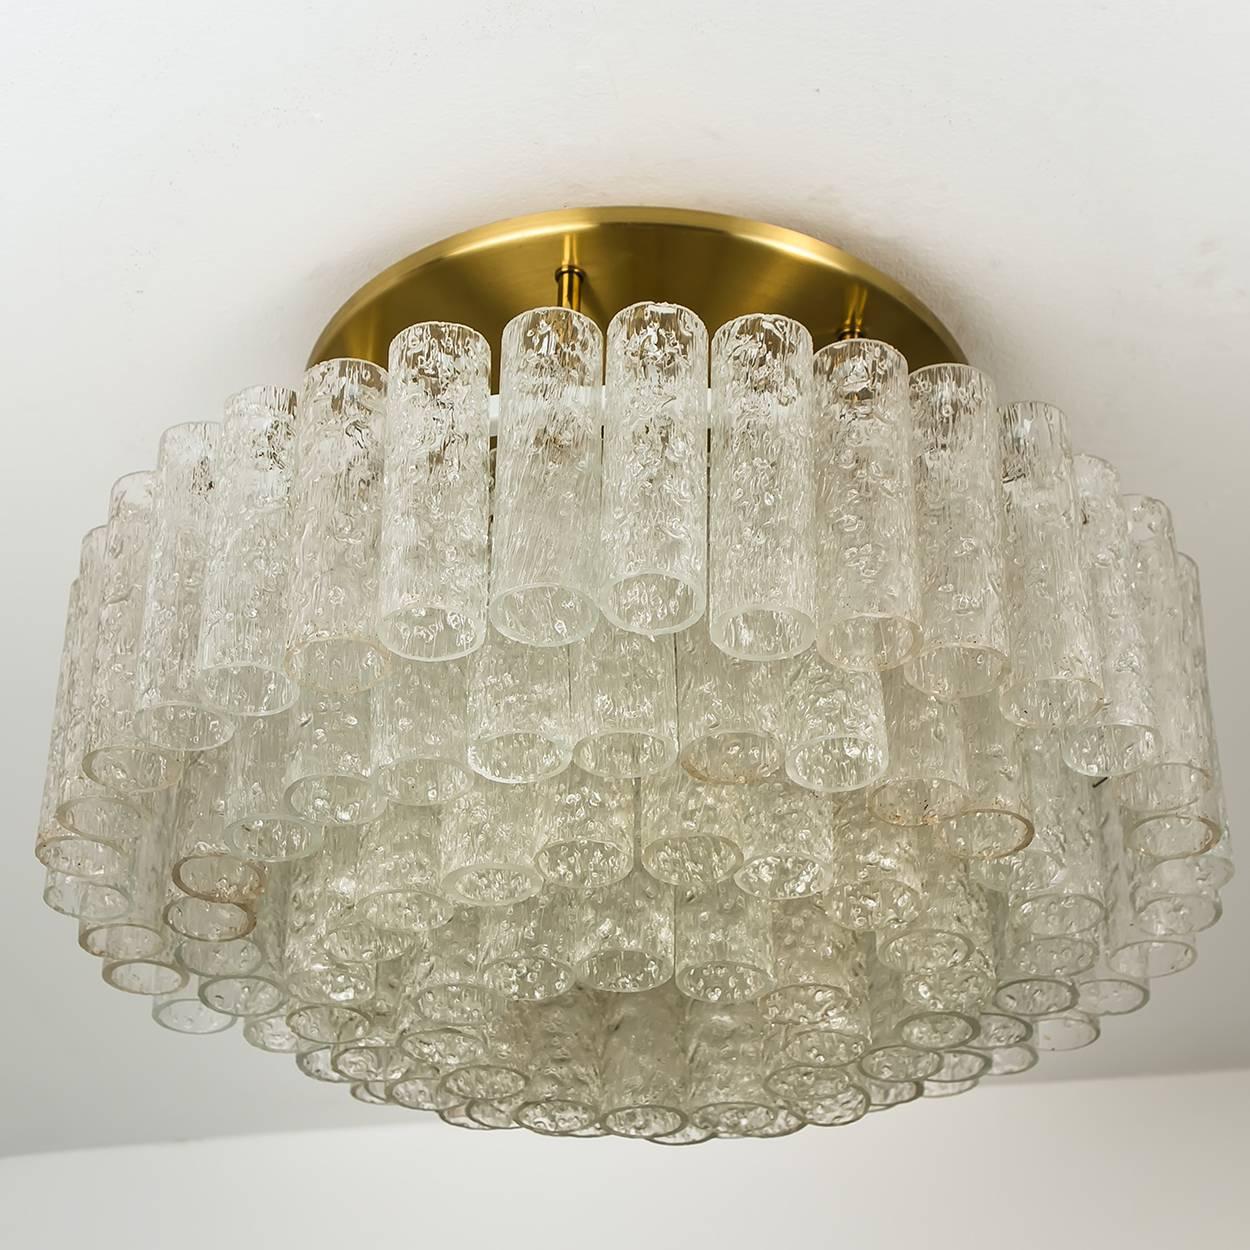 Set of Three Large Glass Brass Light Fixtures by Doria, Germany, 1969 For Sale 7